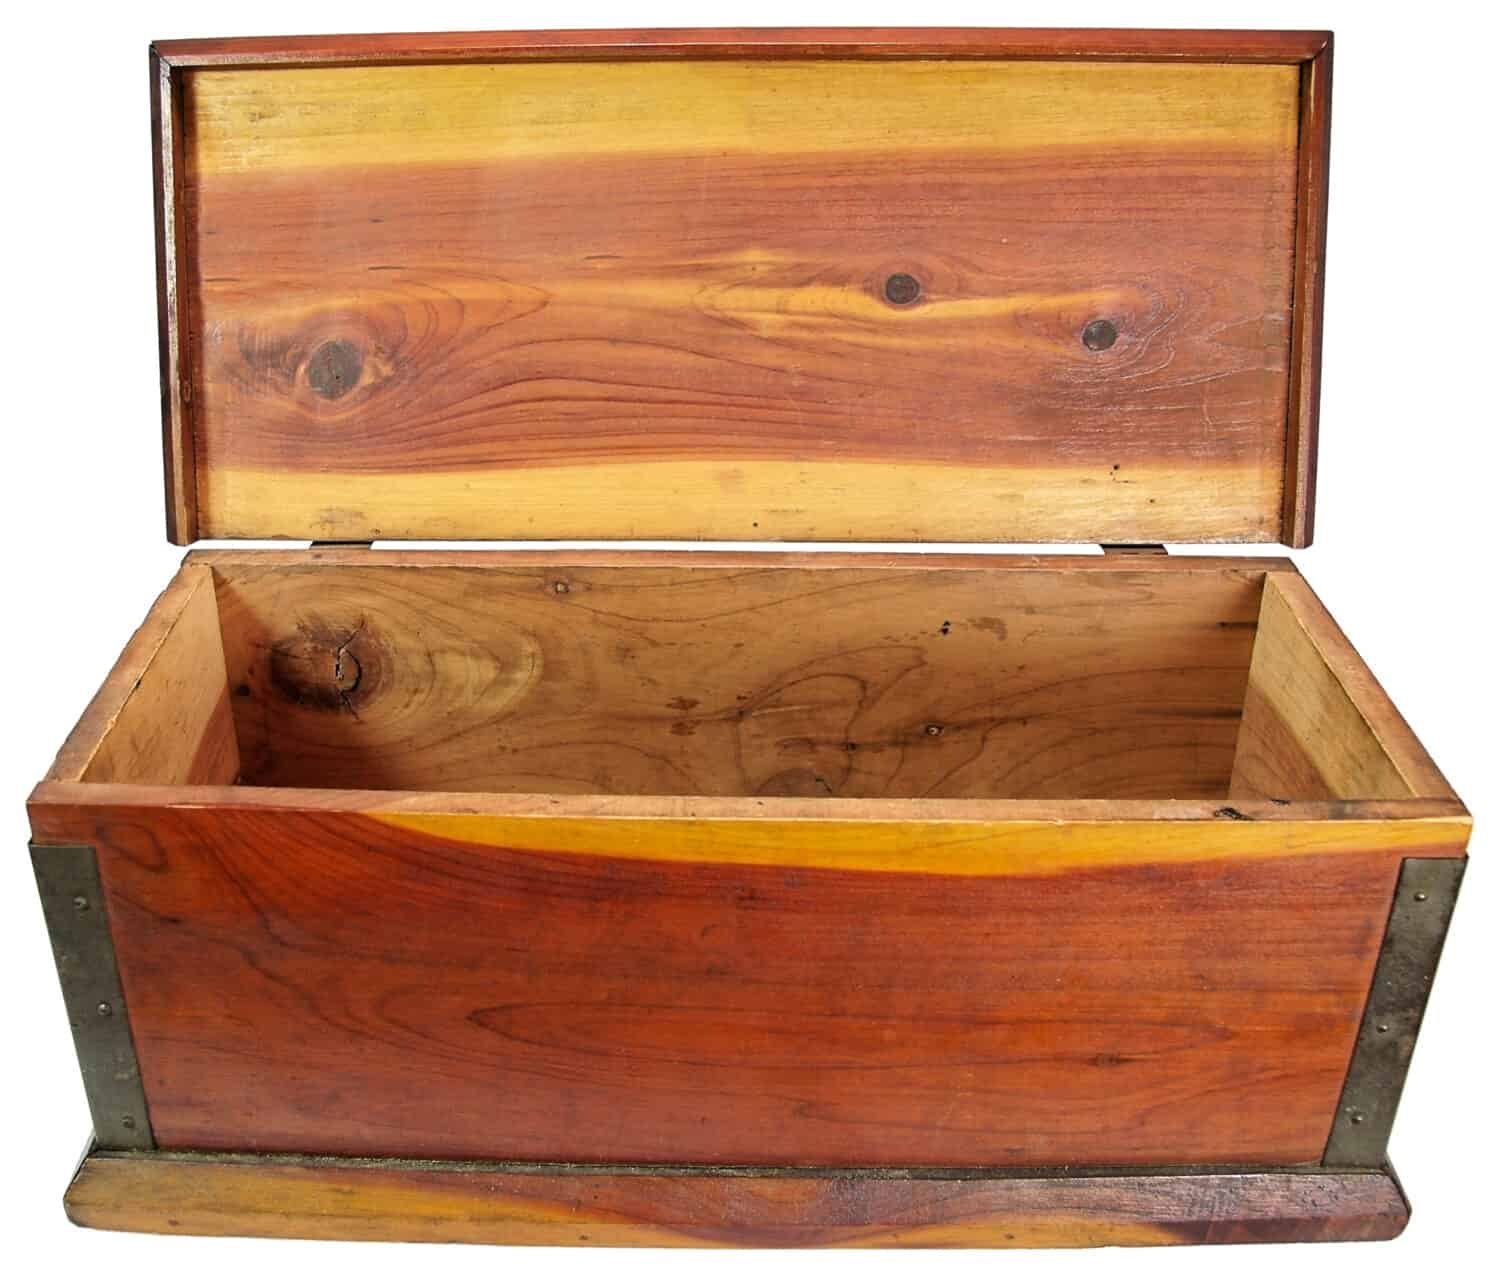 Cedar chest with lid open. Isolated.